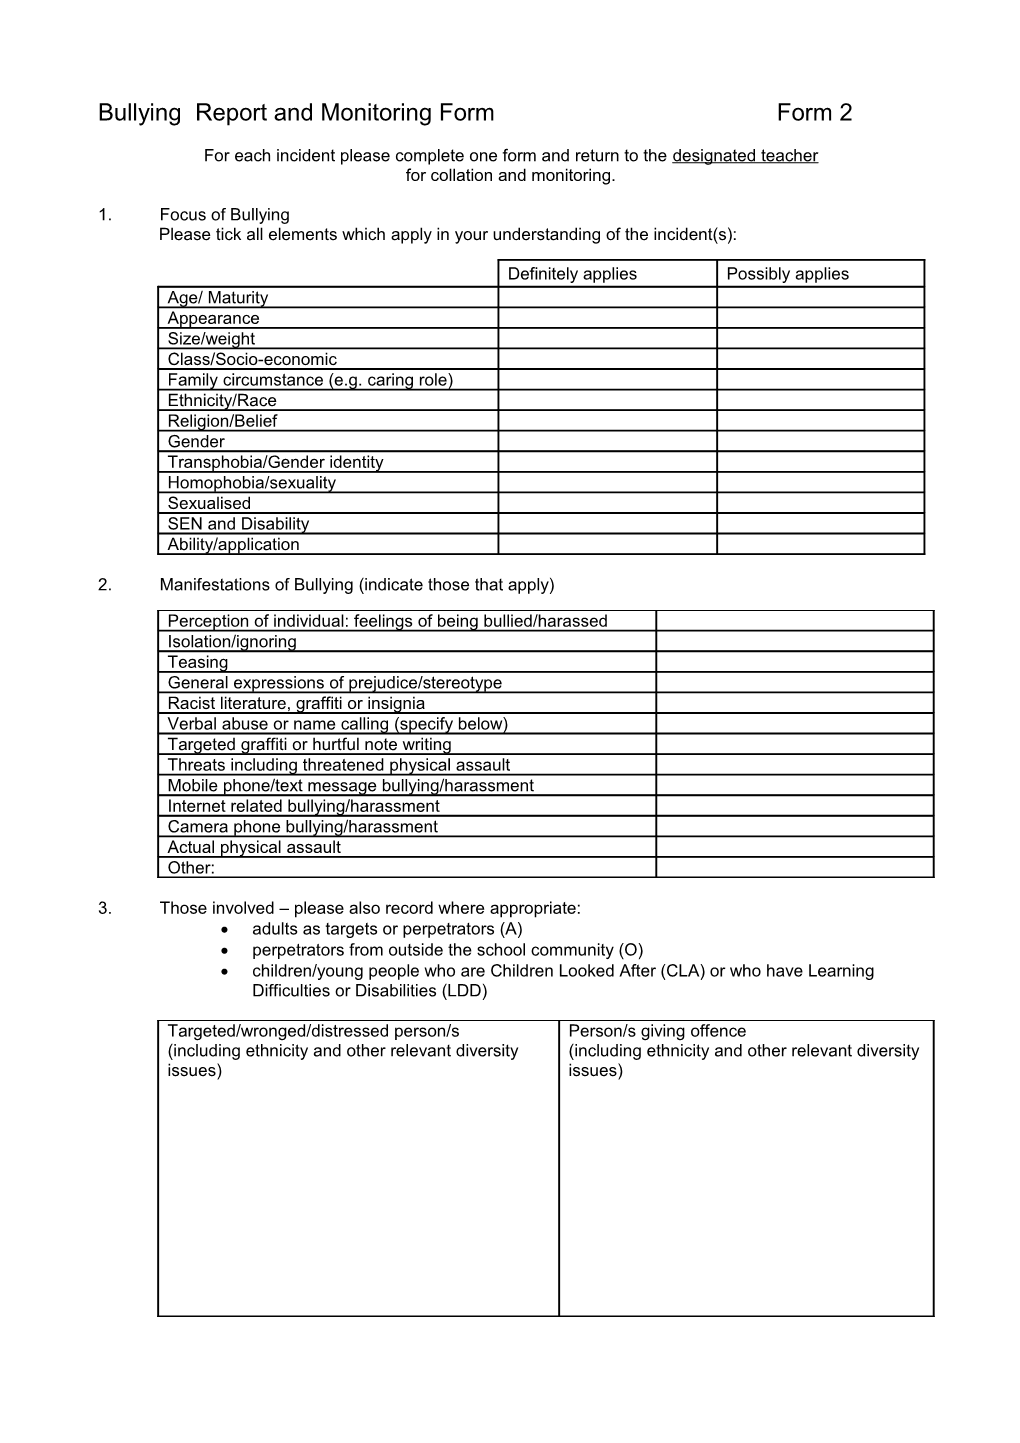 Bullying Report and Monitoring Form 2